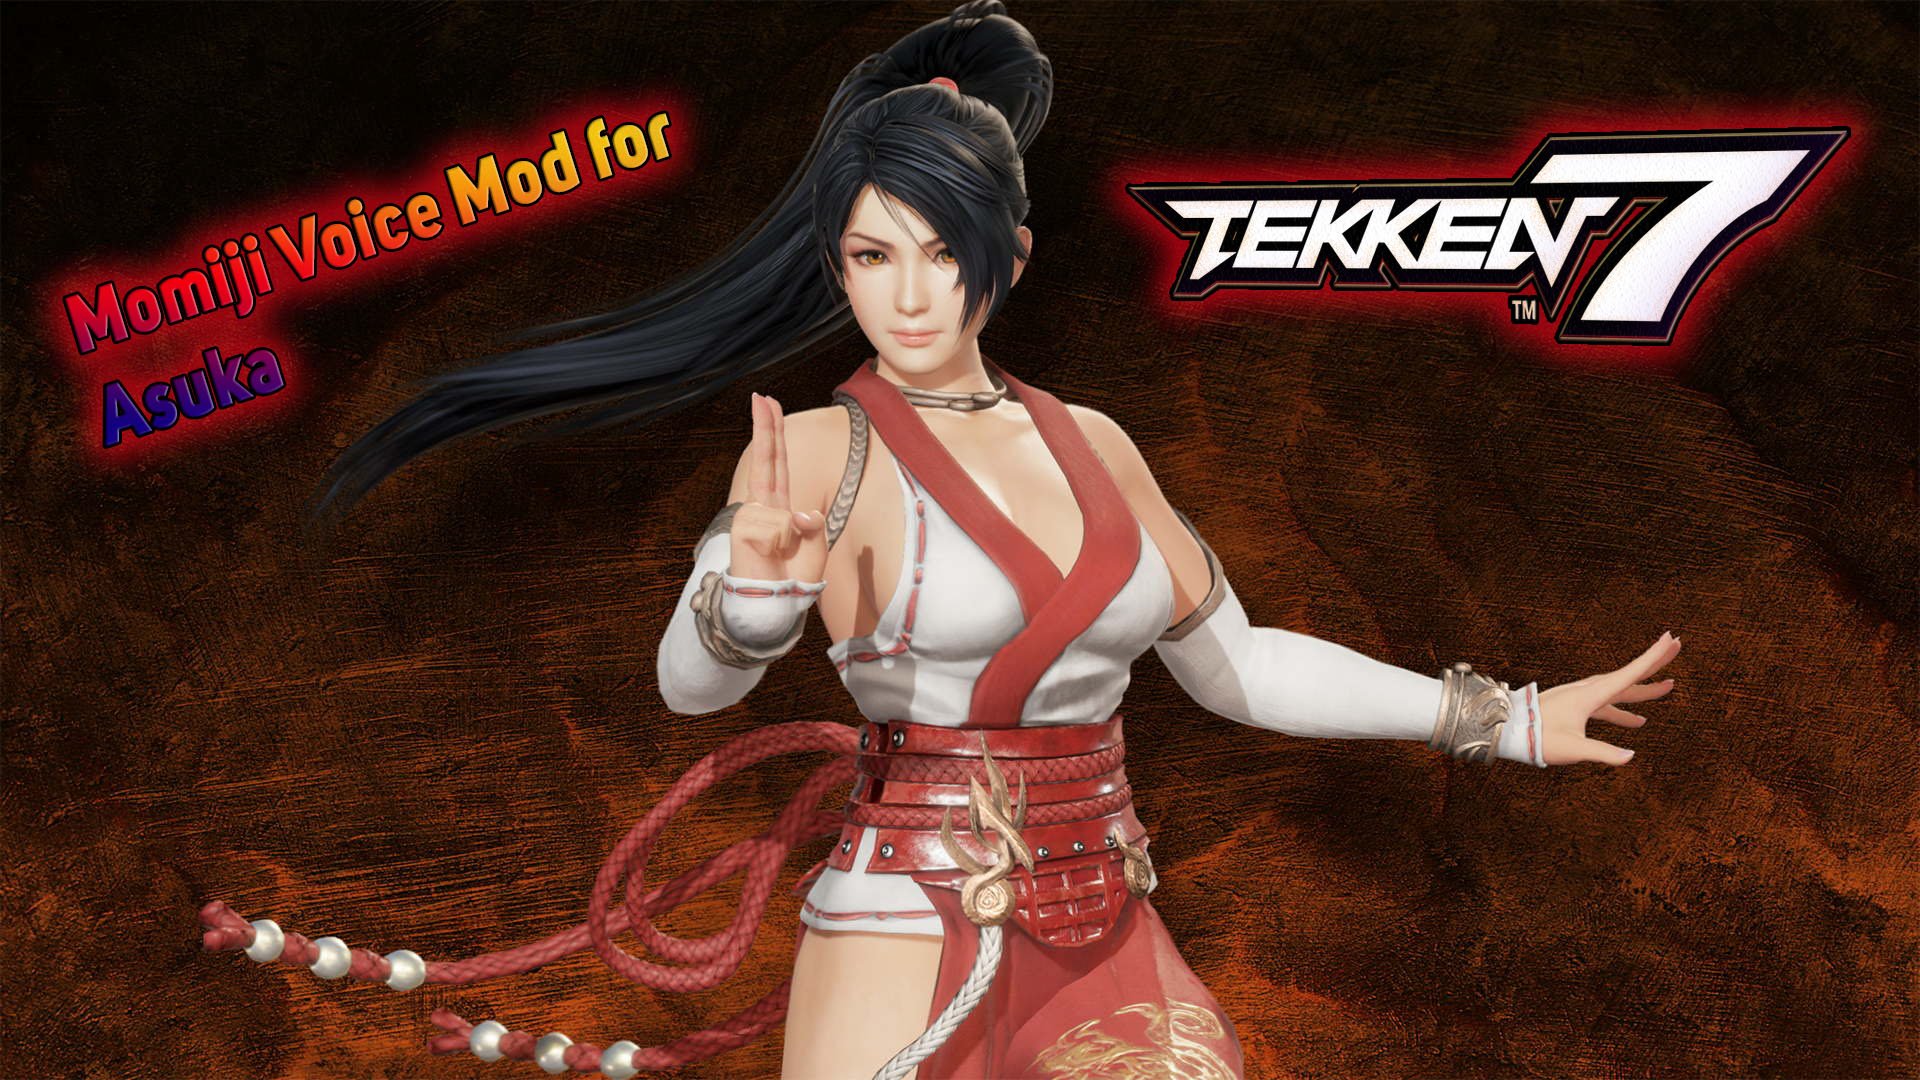 Momiji(Dead Or Alive 5-6) Voice for Asuka